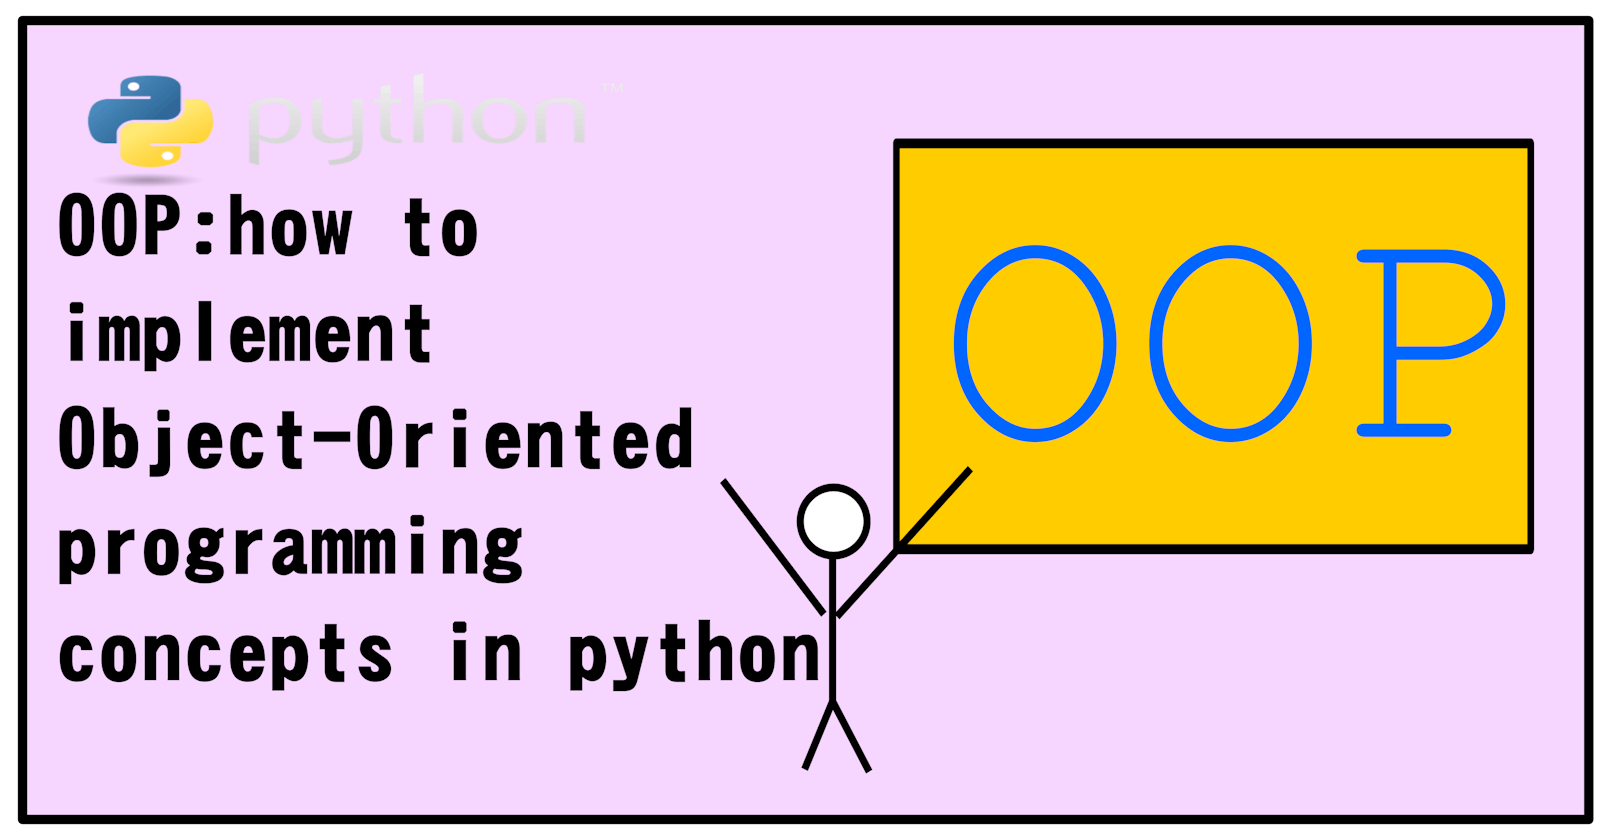 OOP: How to implement Object-Oriented Programming concepts in python